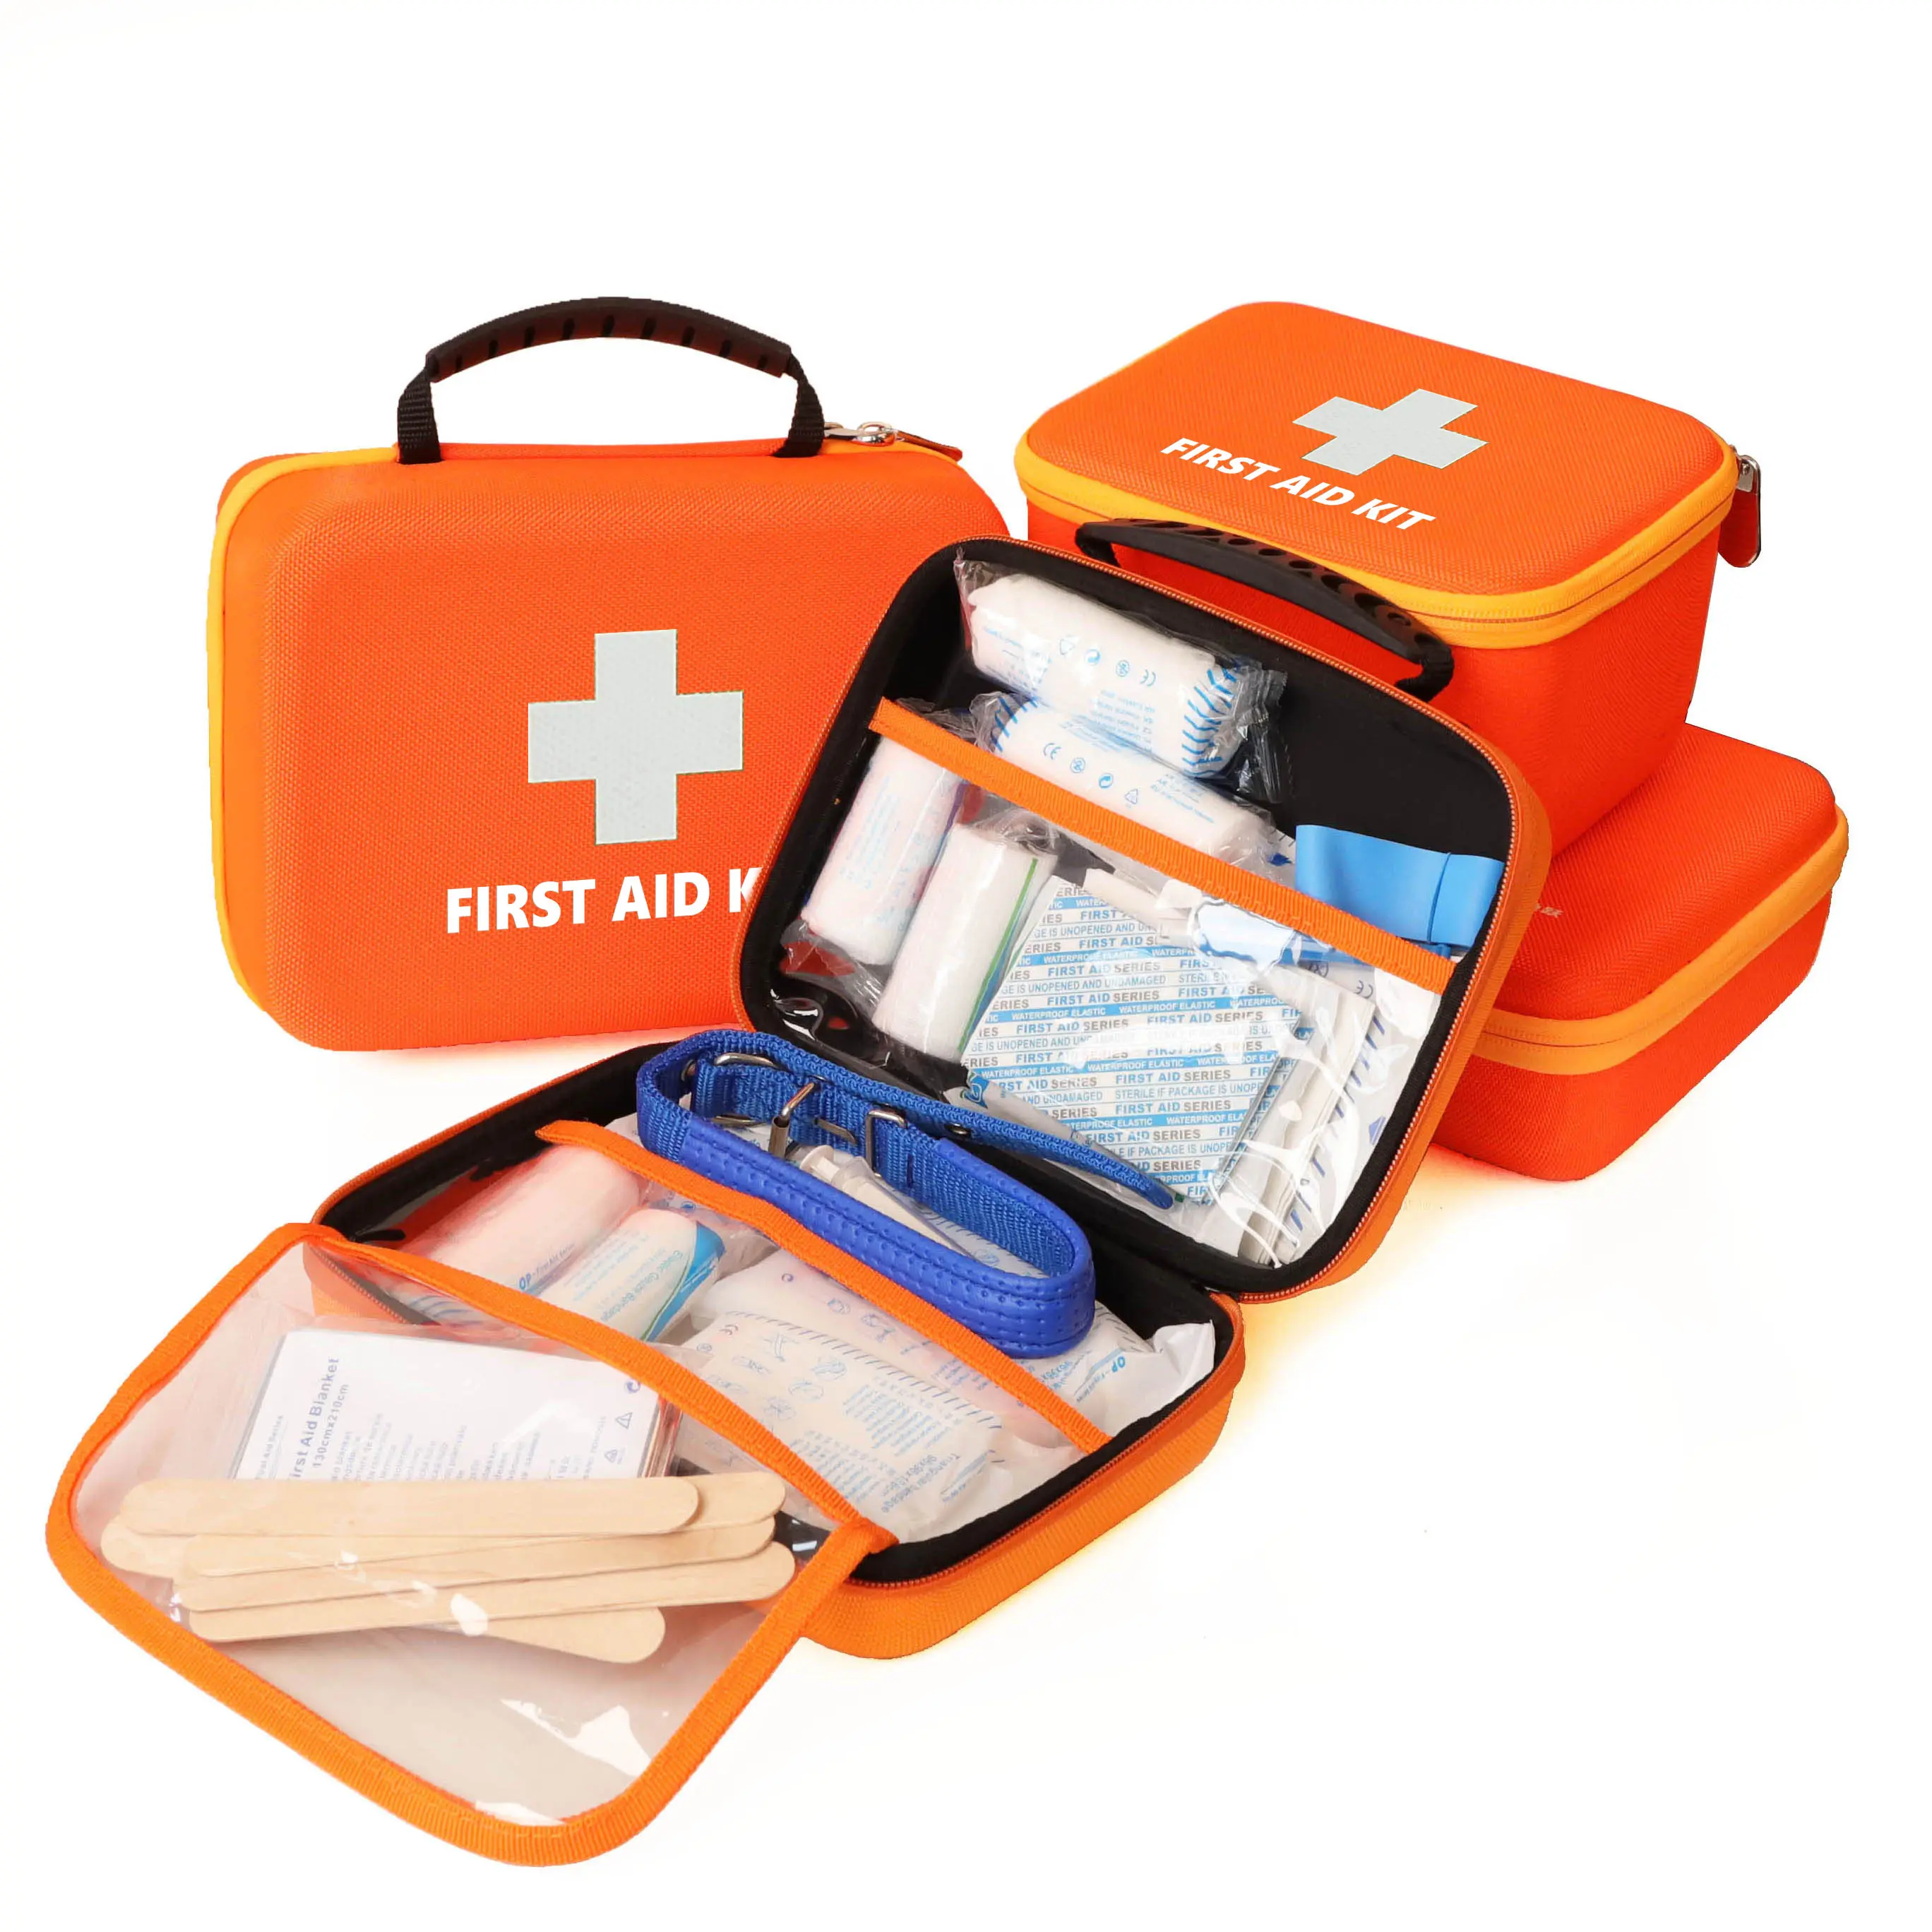 Iso Certificate Home Travel Outdoor Industrial First Aid box or bags With Medical Equipment item 299 piece